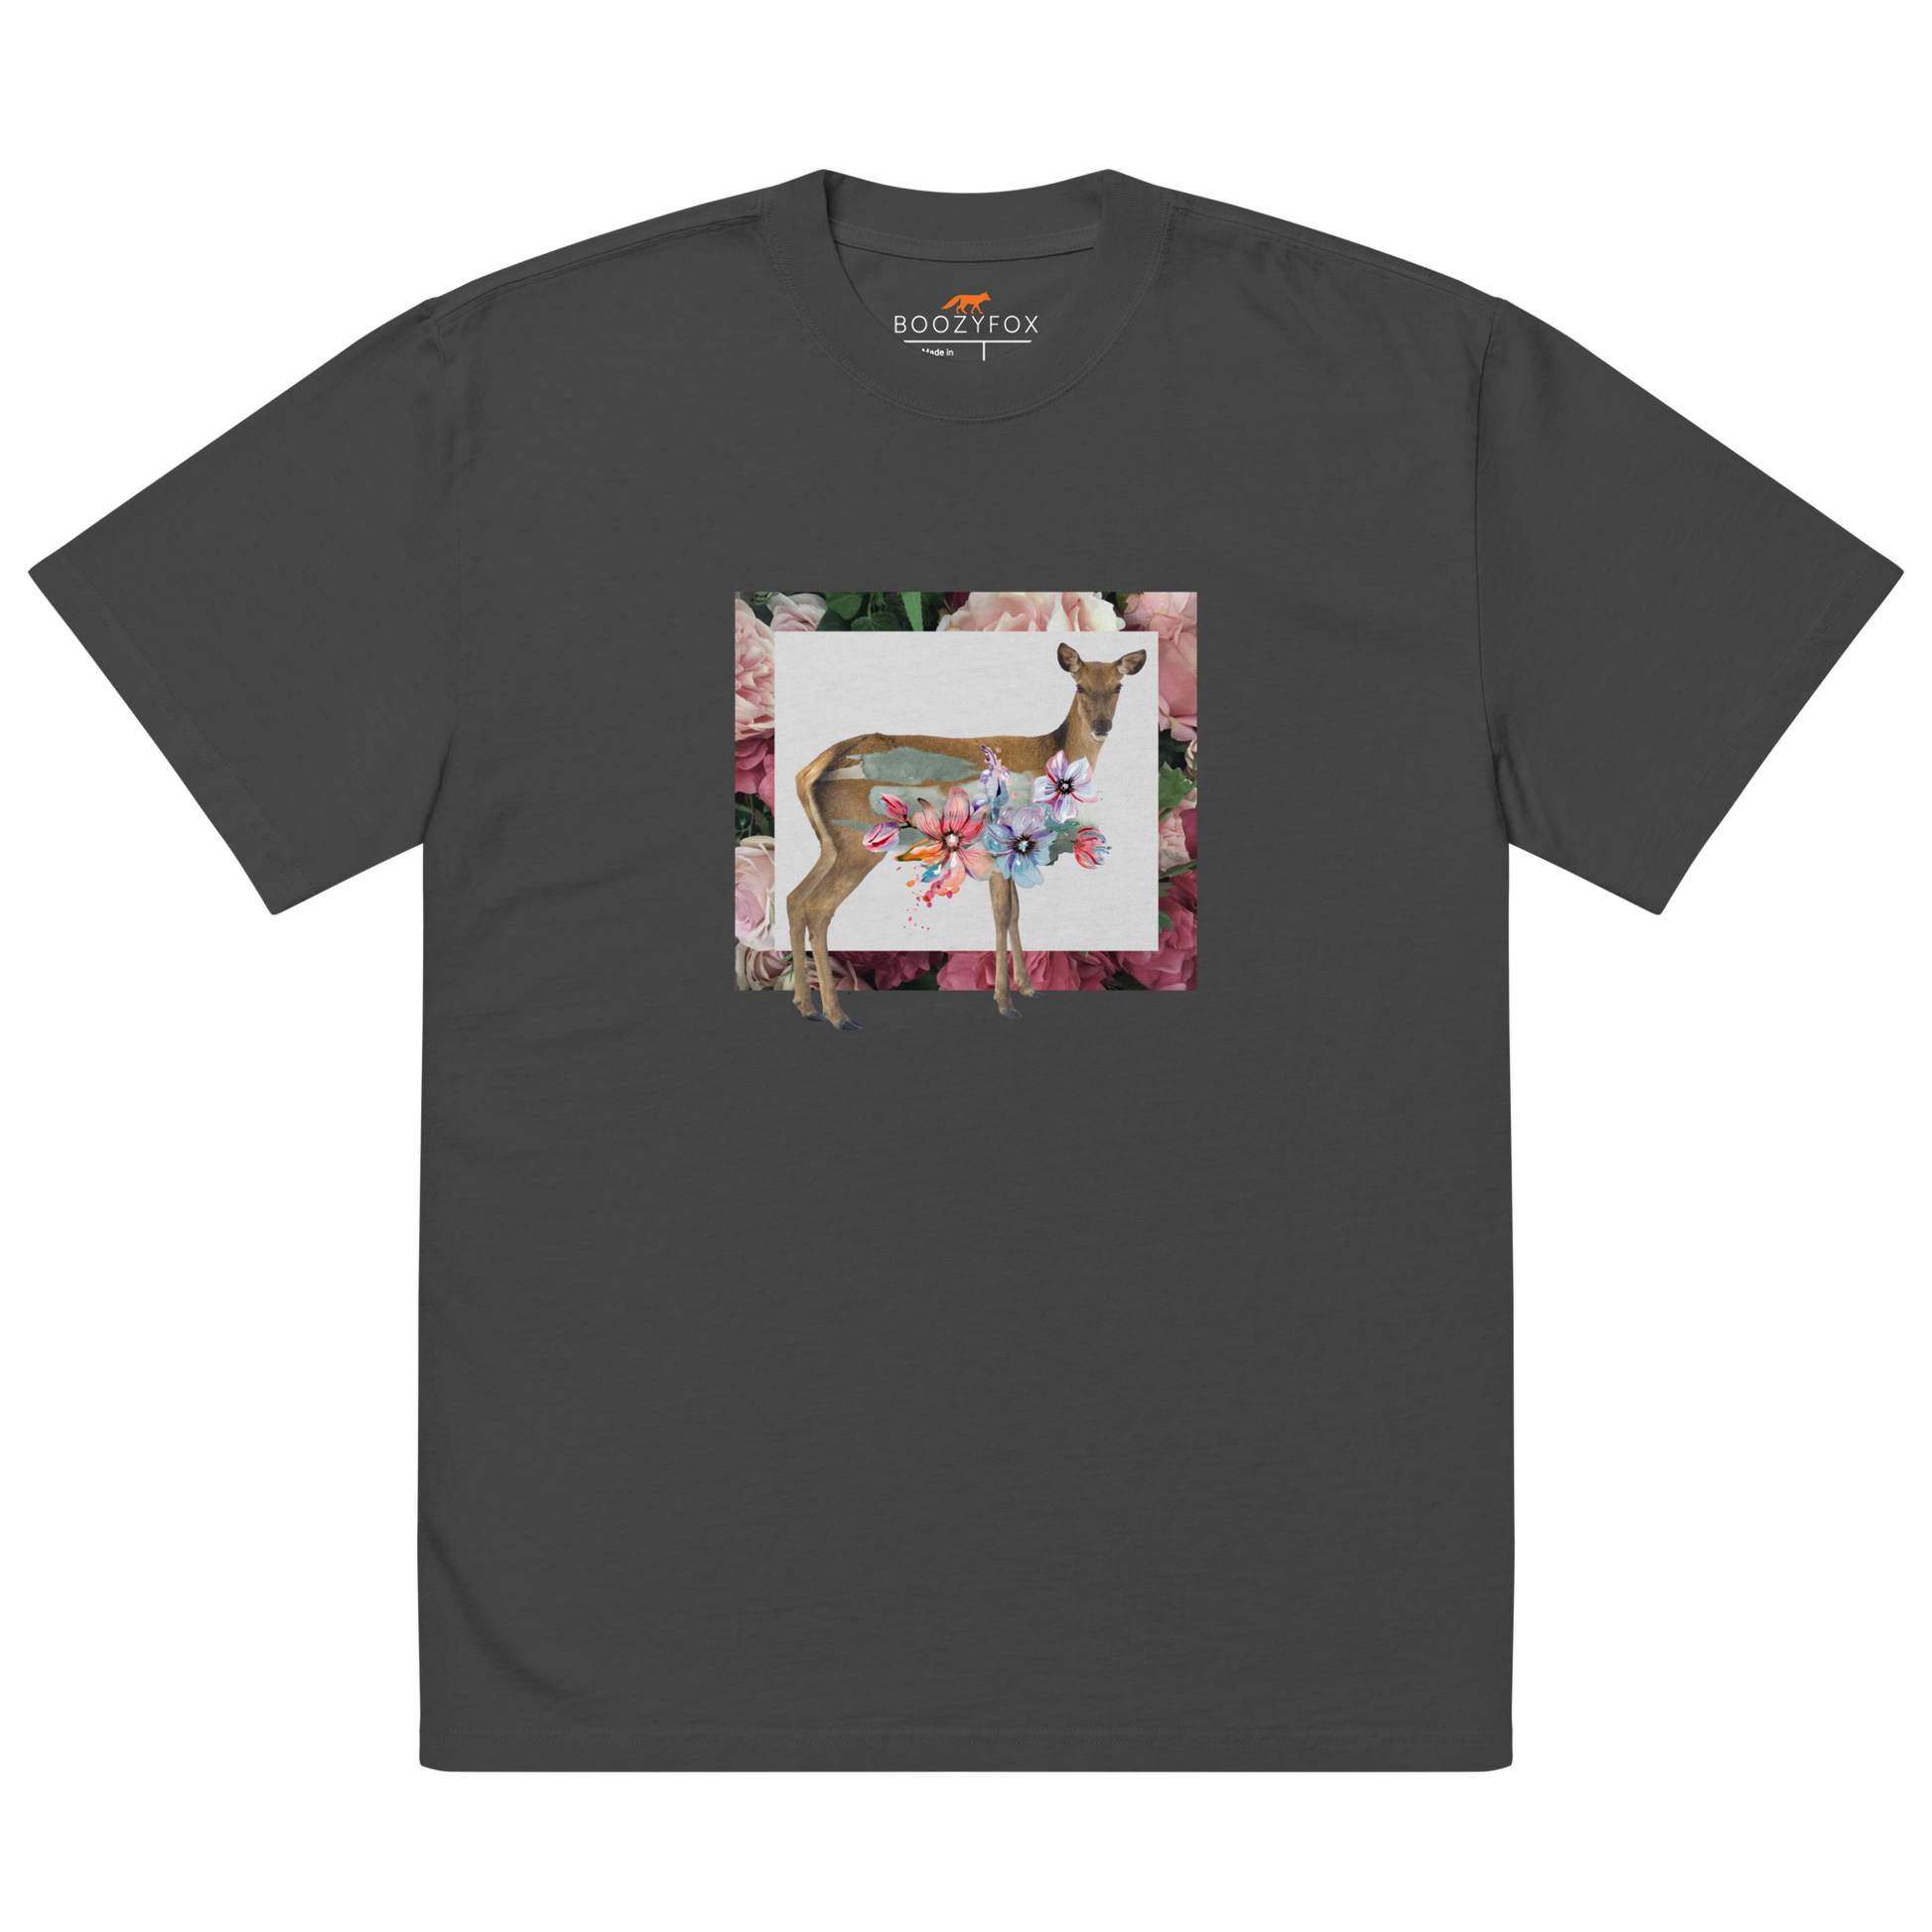 Faded Black Deer Oversized T-Shirt featuring a captivating Floral Deer graphic on the chest - Cute Graphic Deer Oversized Tees - Boozy Fox